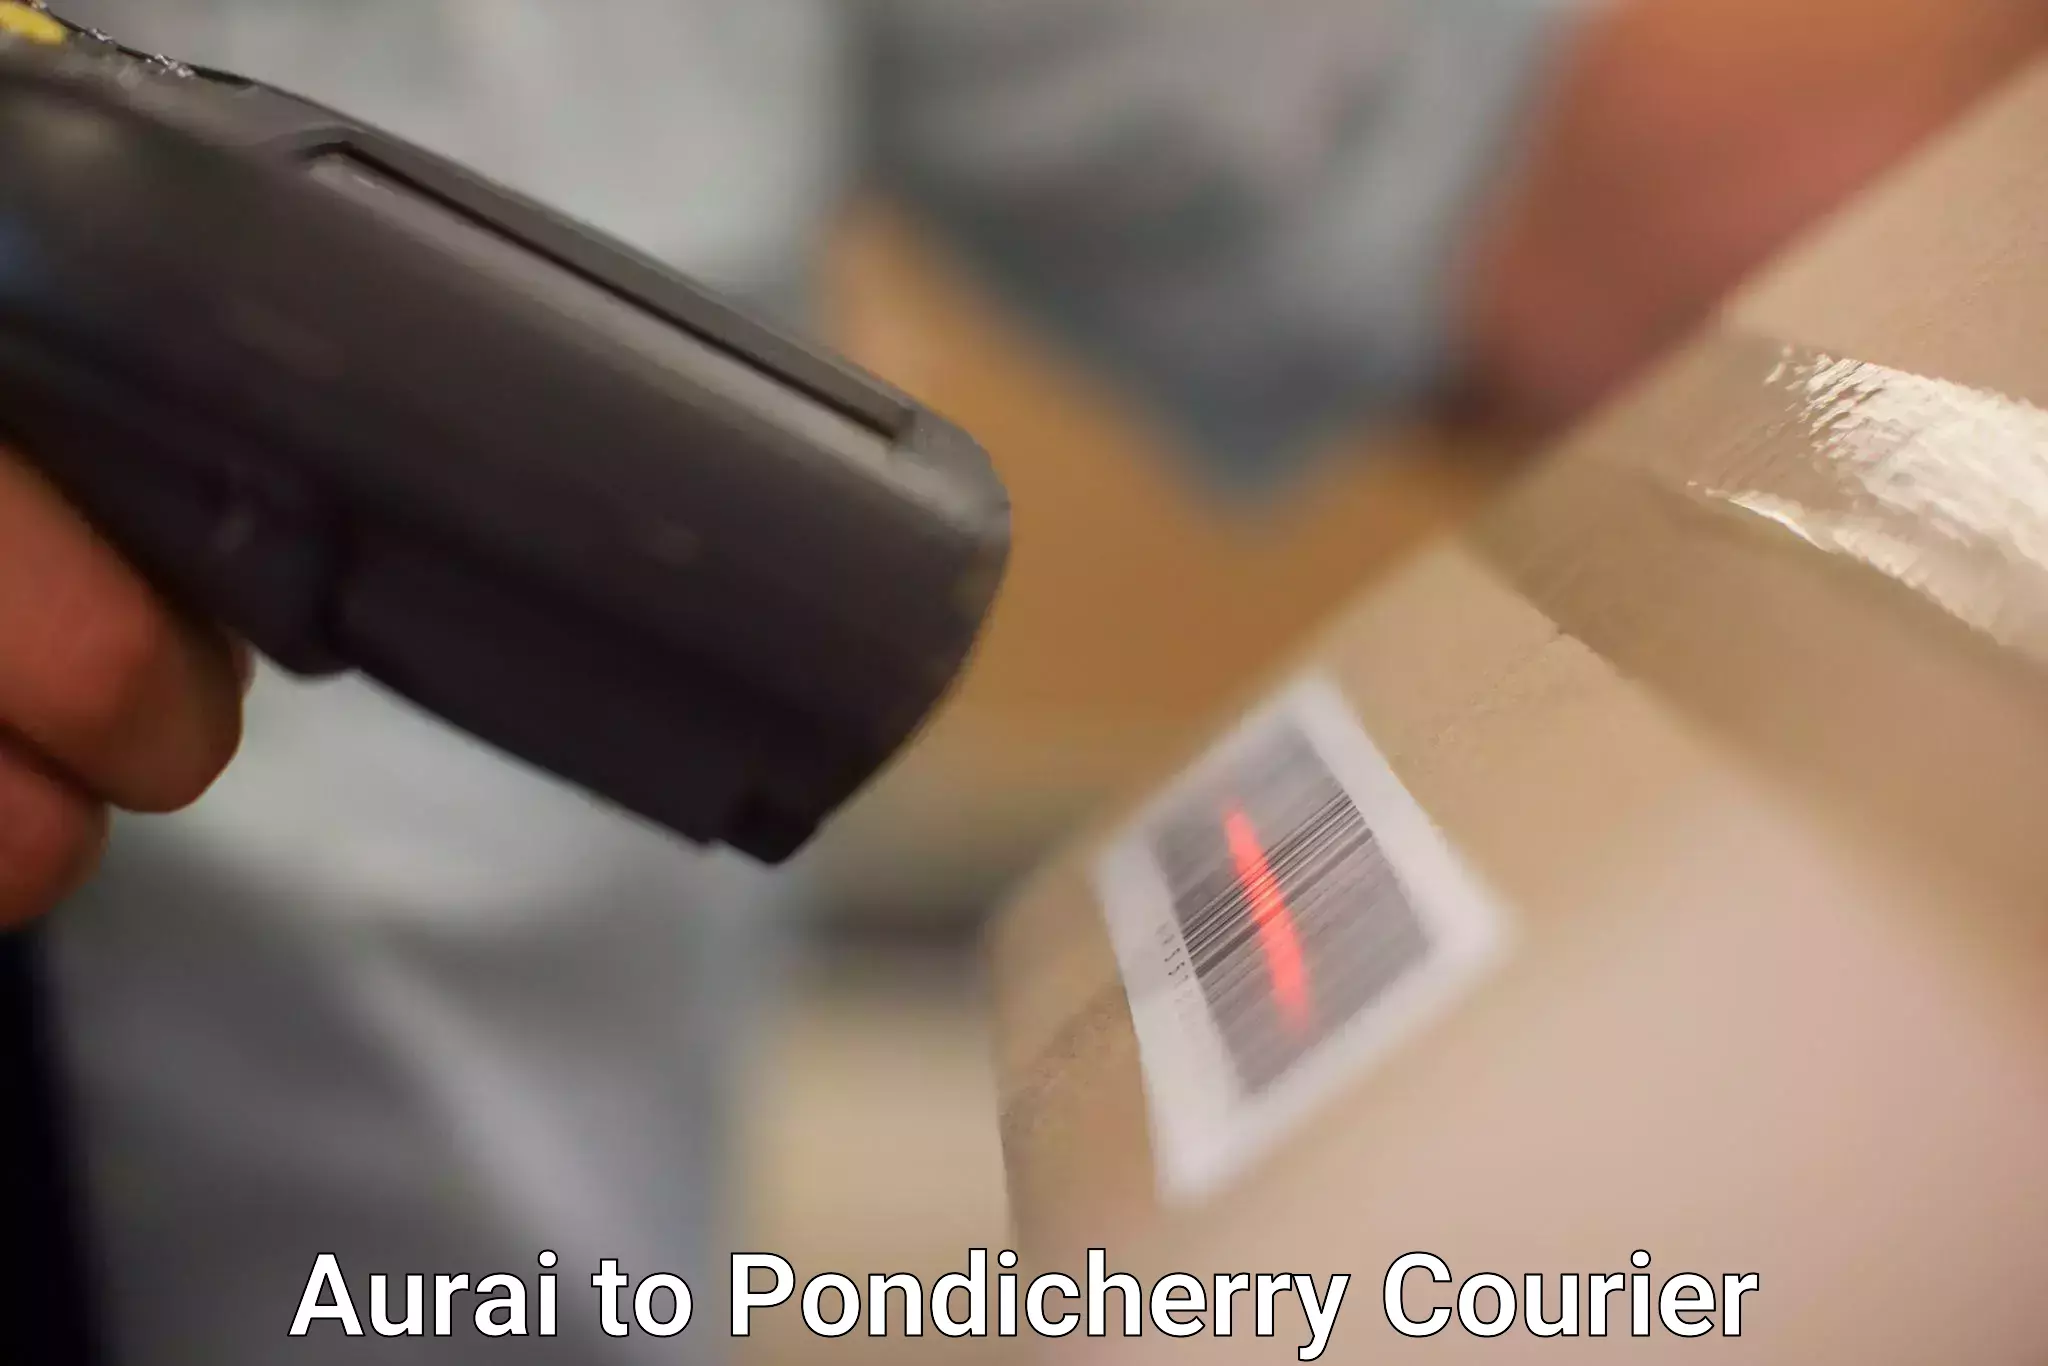 State-of-the-art courier technology Aurai to Pondicherry